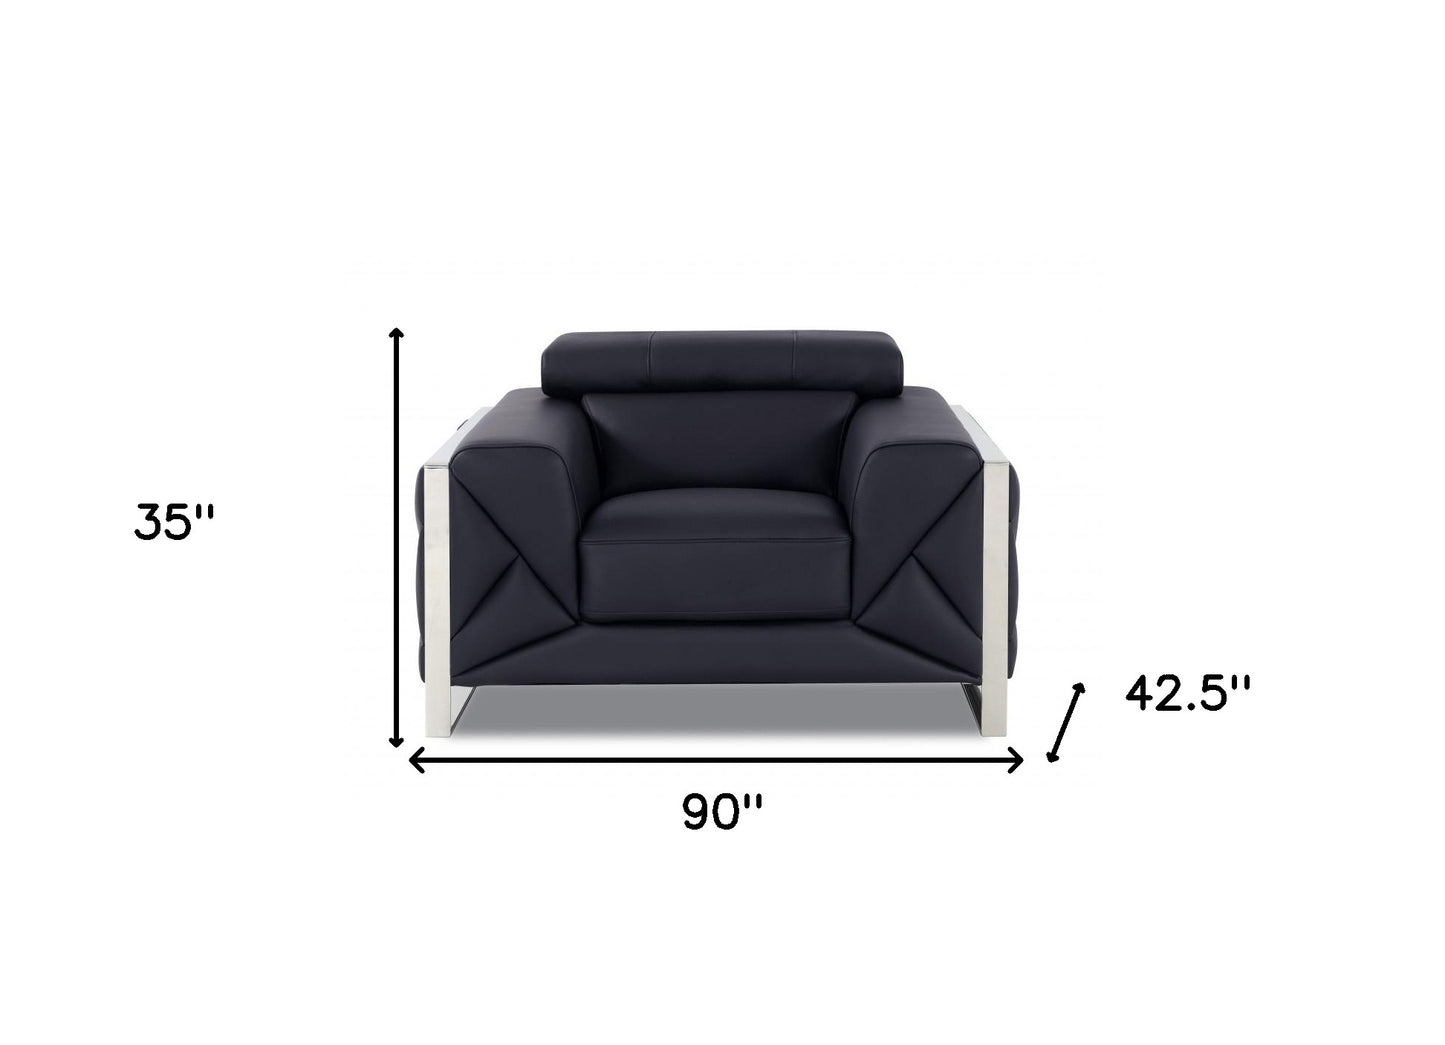 Three Piece Black Italian Leather Six Person Seating Set By Homeroots